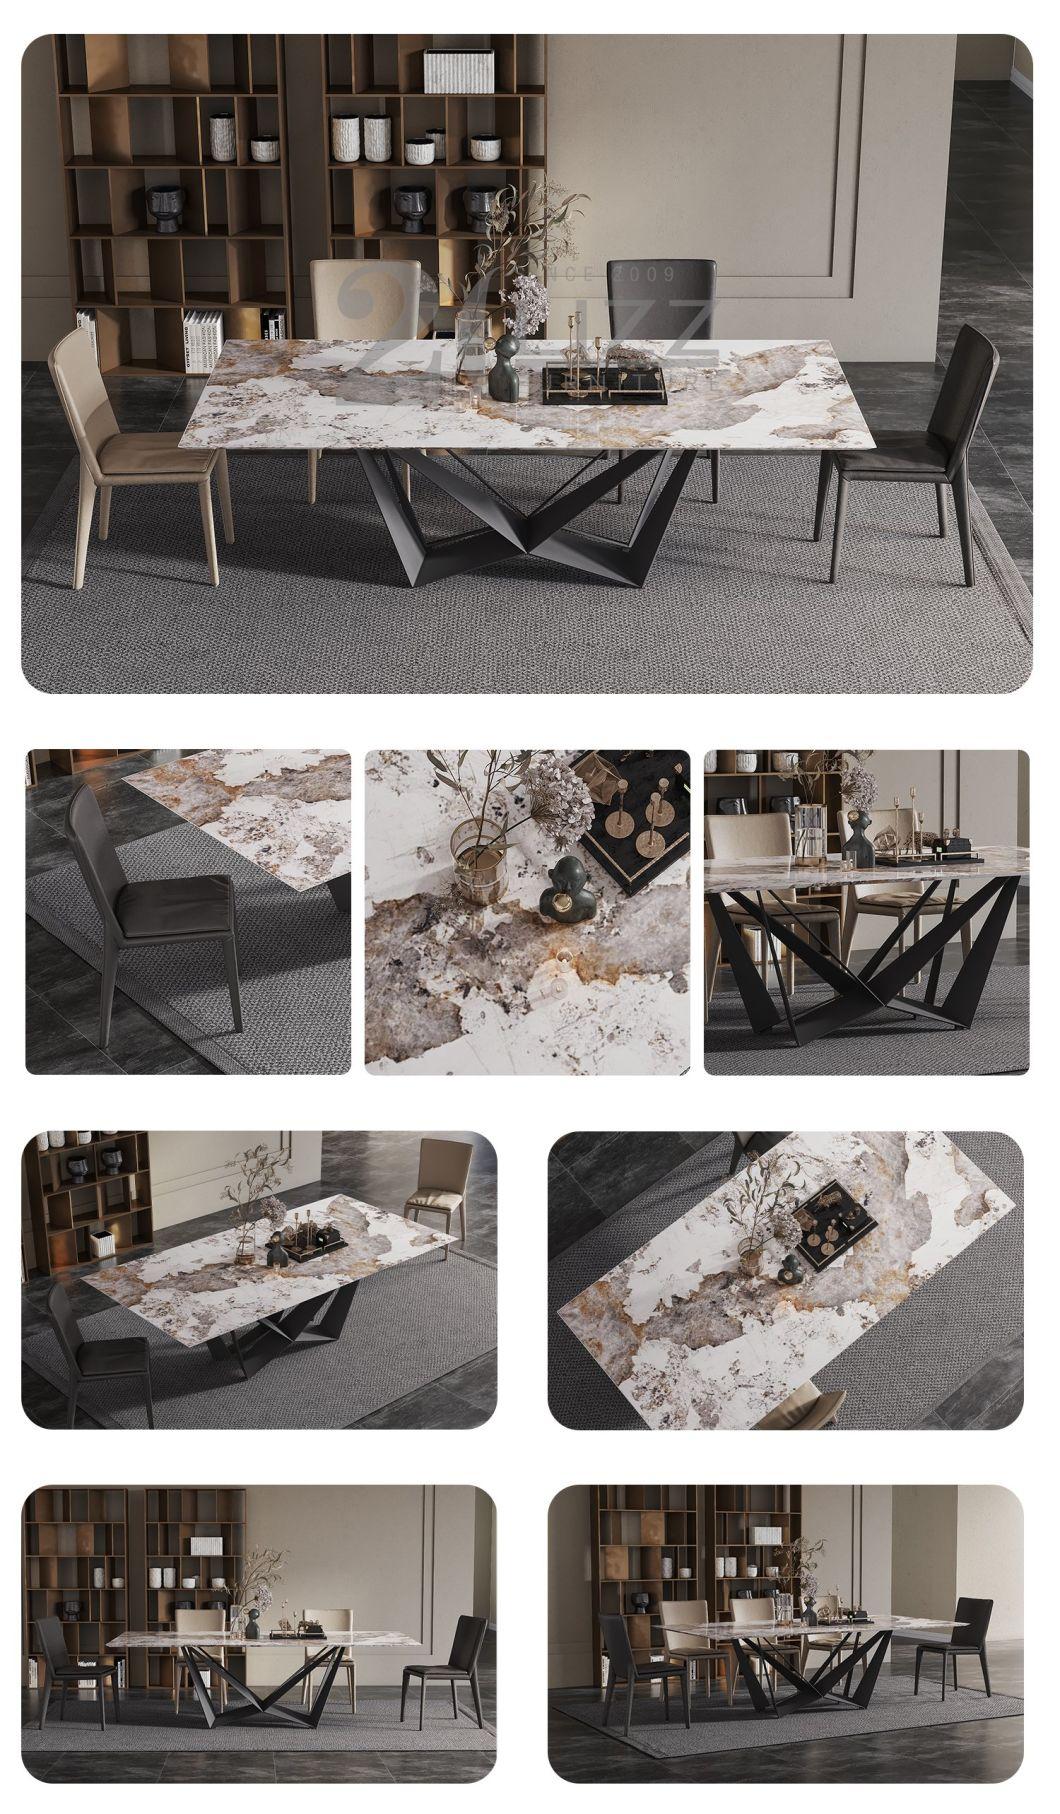 New Arrival Modern Luxury High Quality Home Furniture European Style Dining Room Table Set